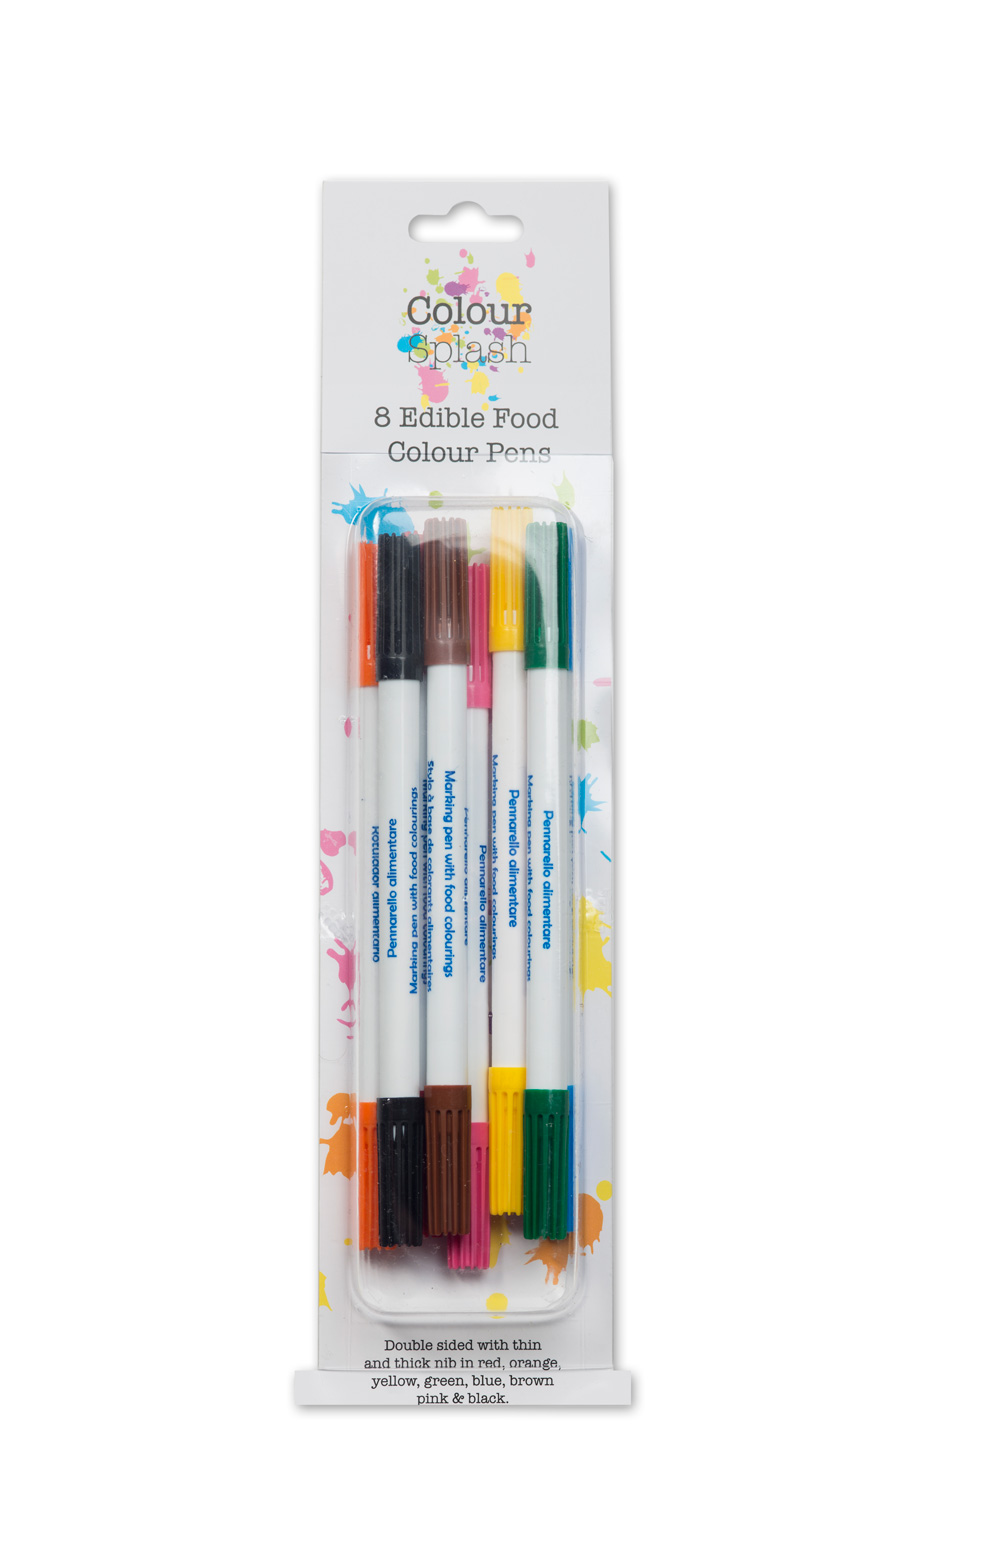 Easy baking; 8 x coloured food writing pens for cookies